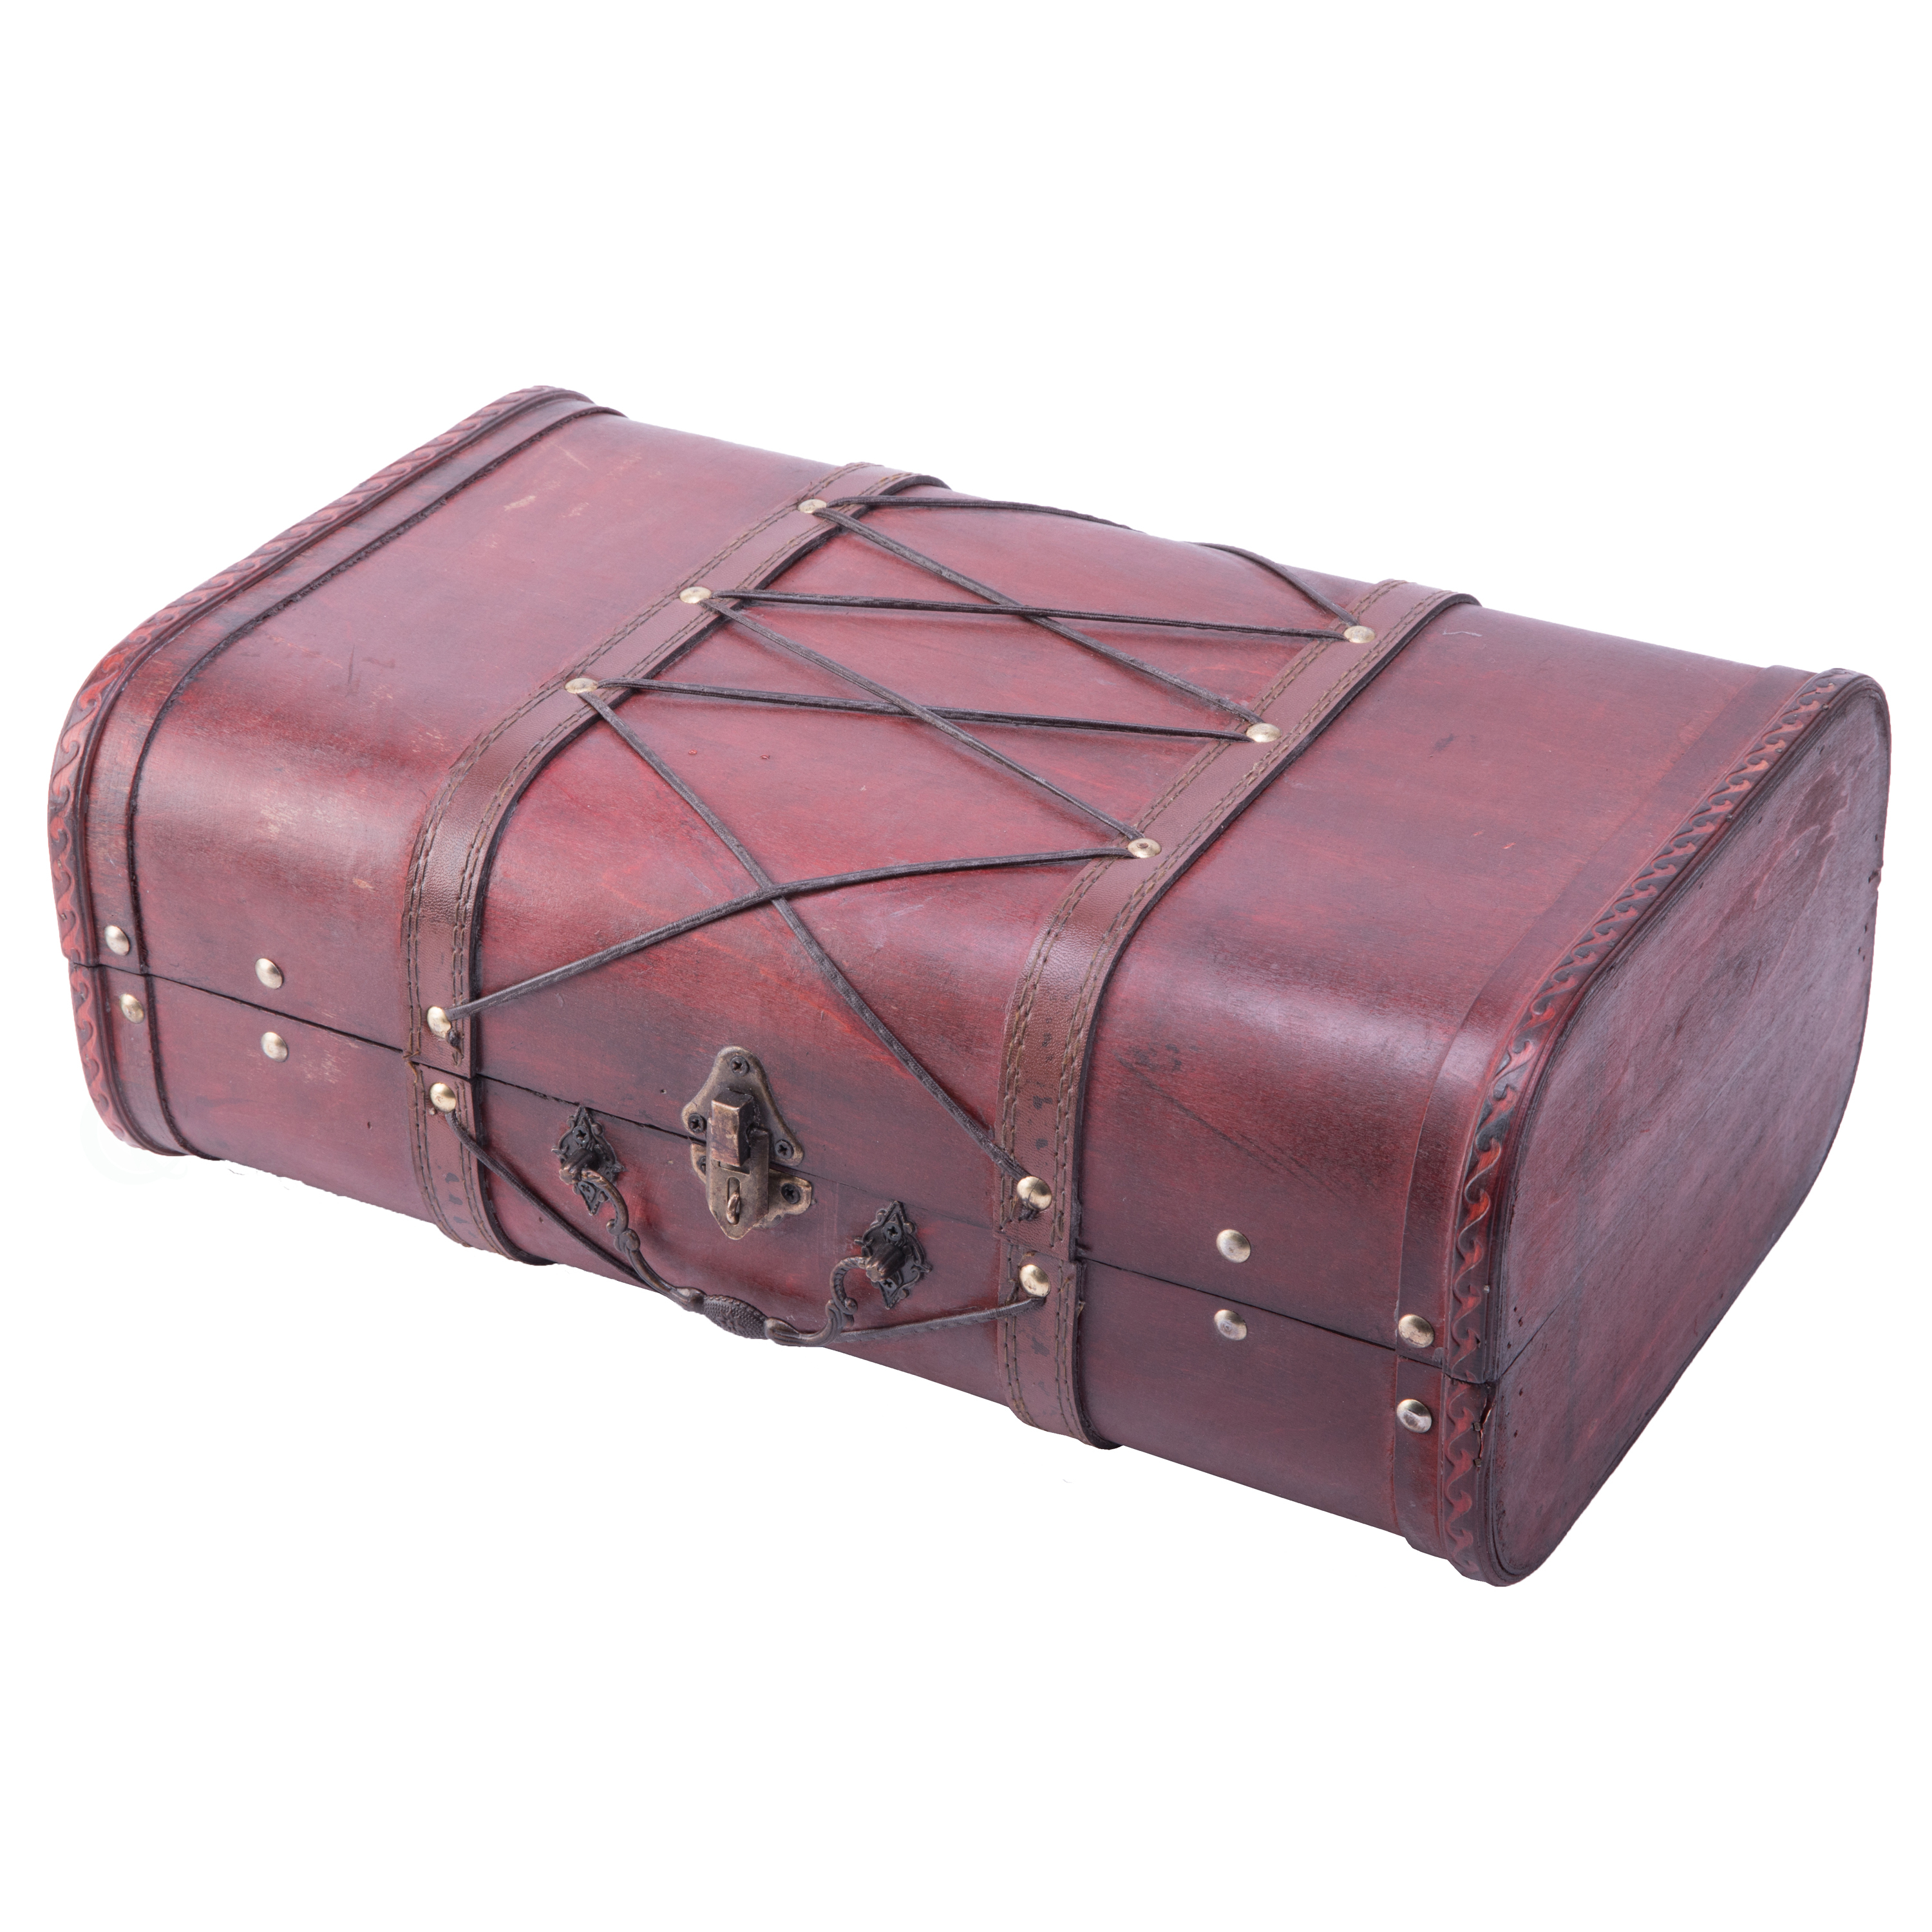 Pirate Style Cherry Vintage Wooden Luggage With X Design